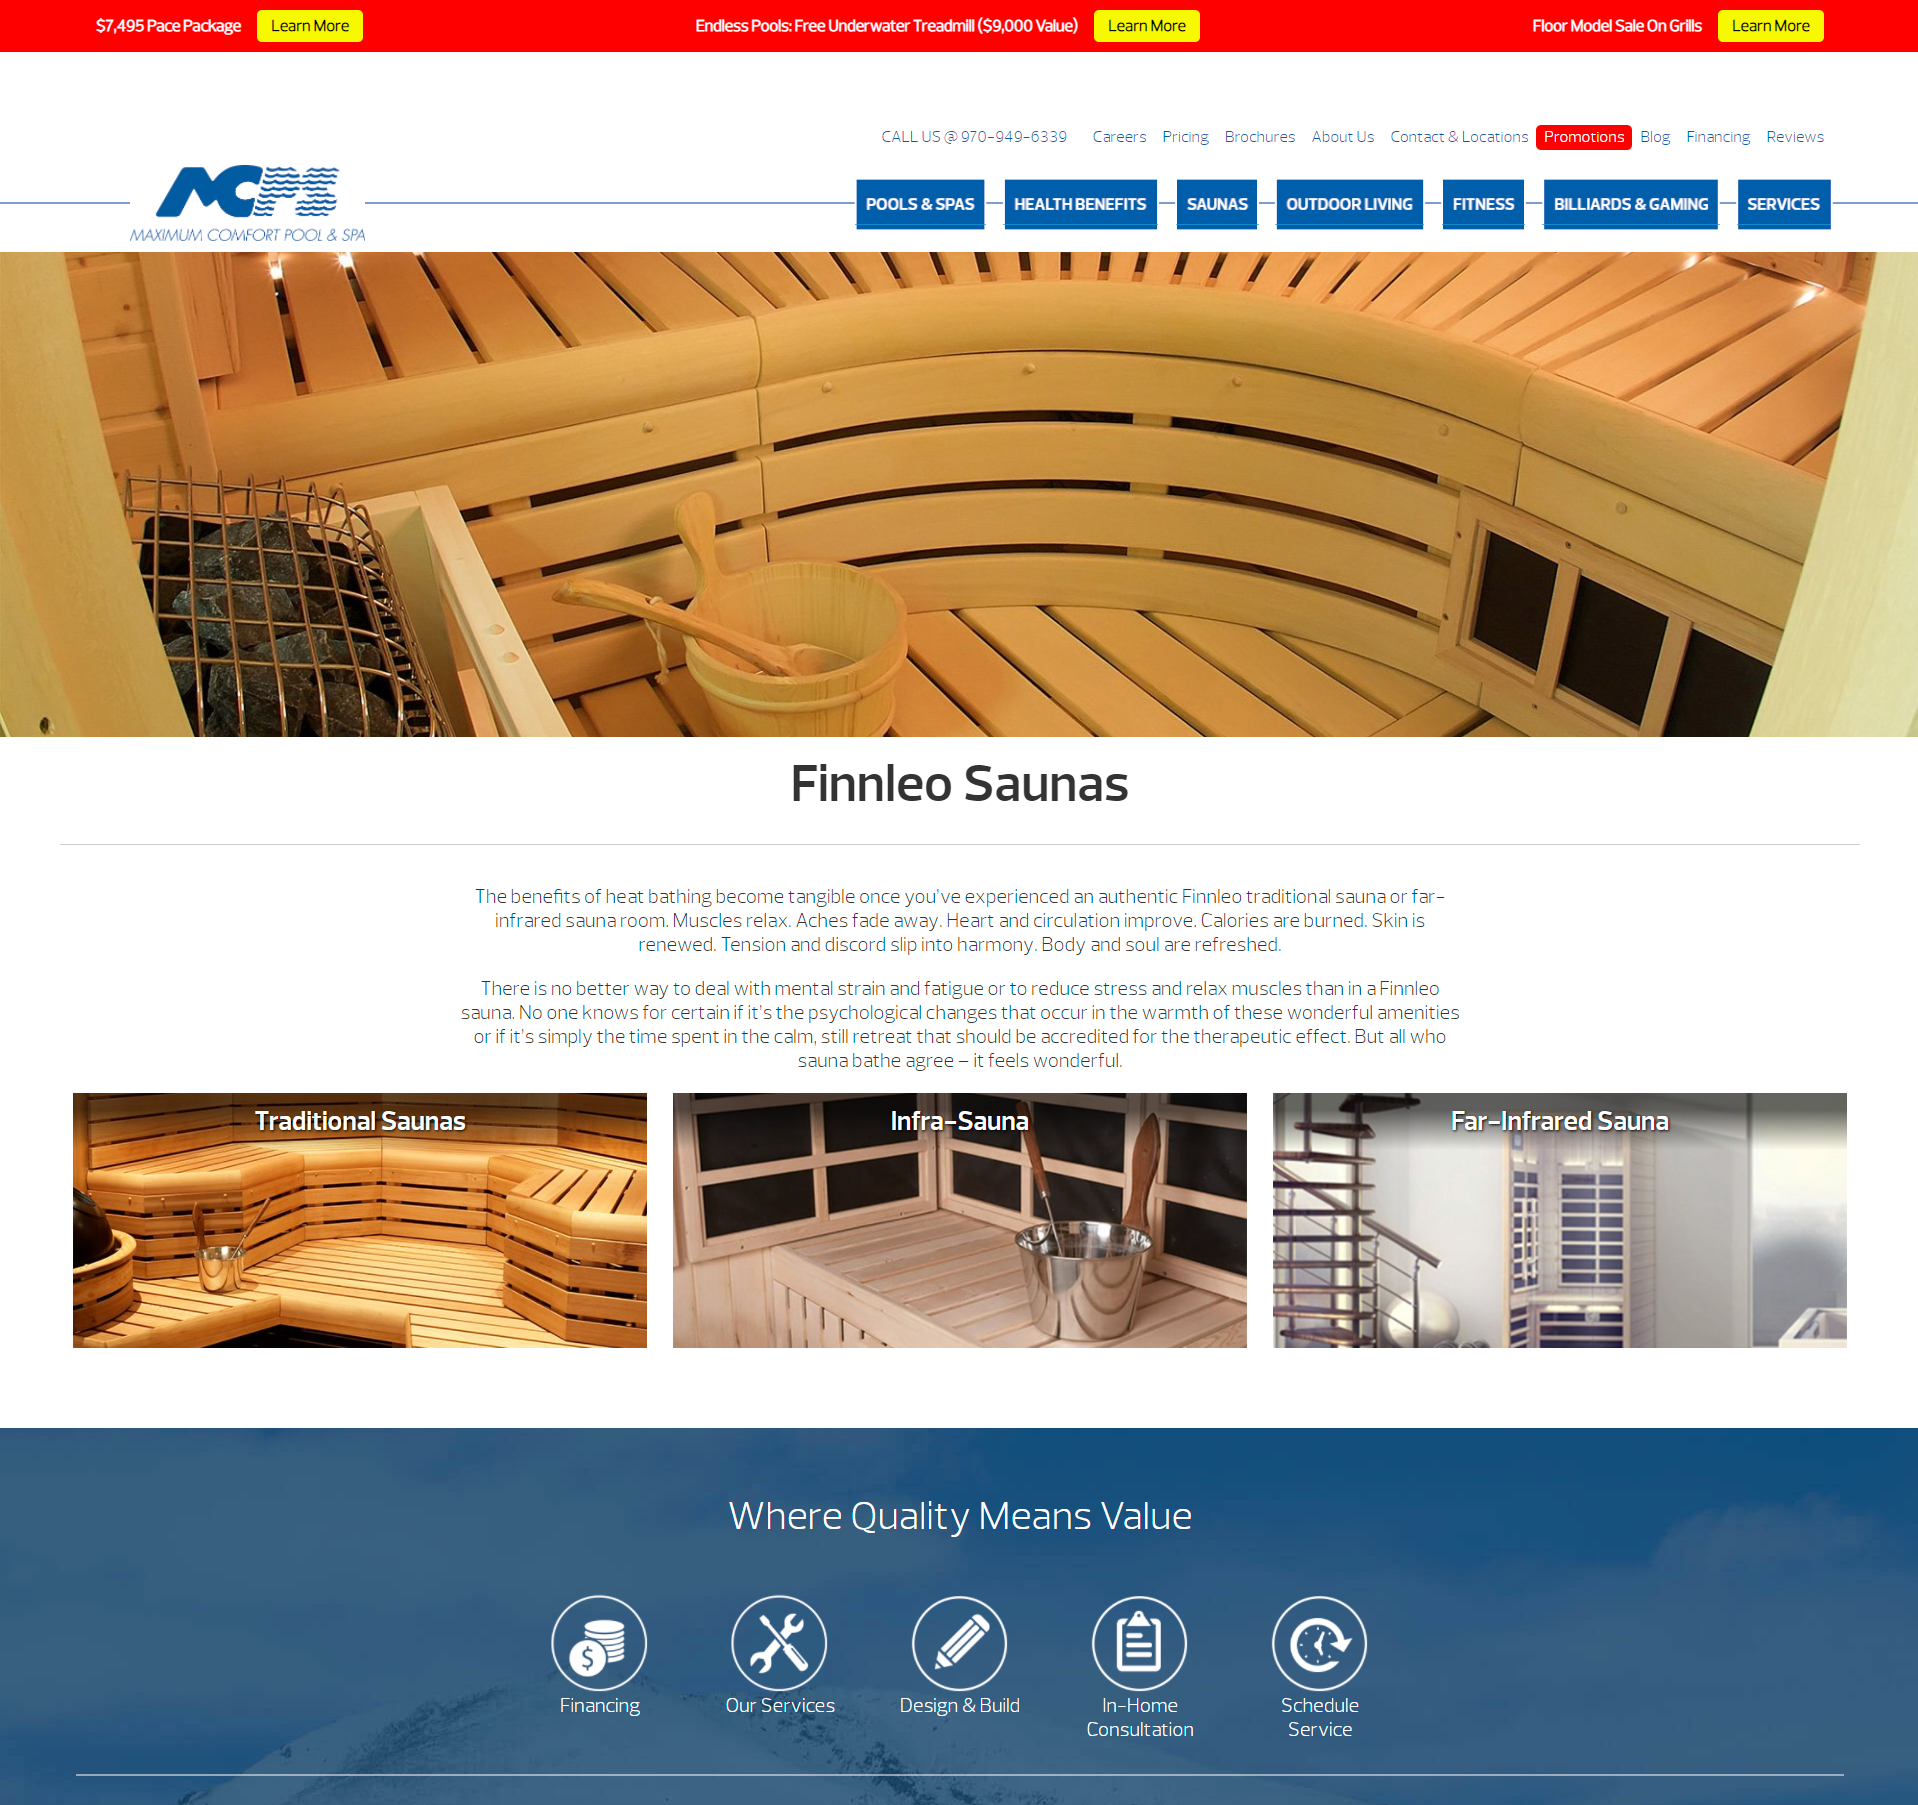 An example of a landing page for finnleo saunas for product pages